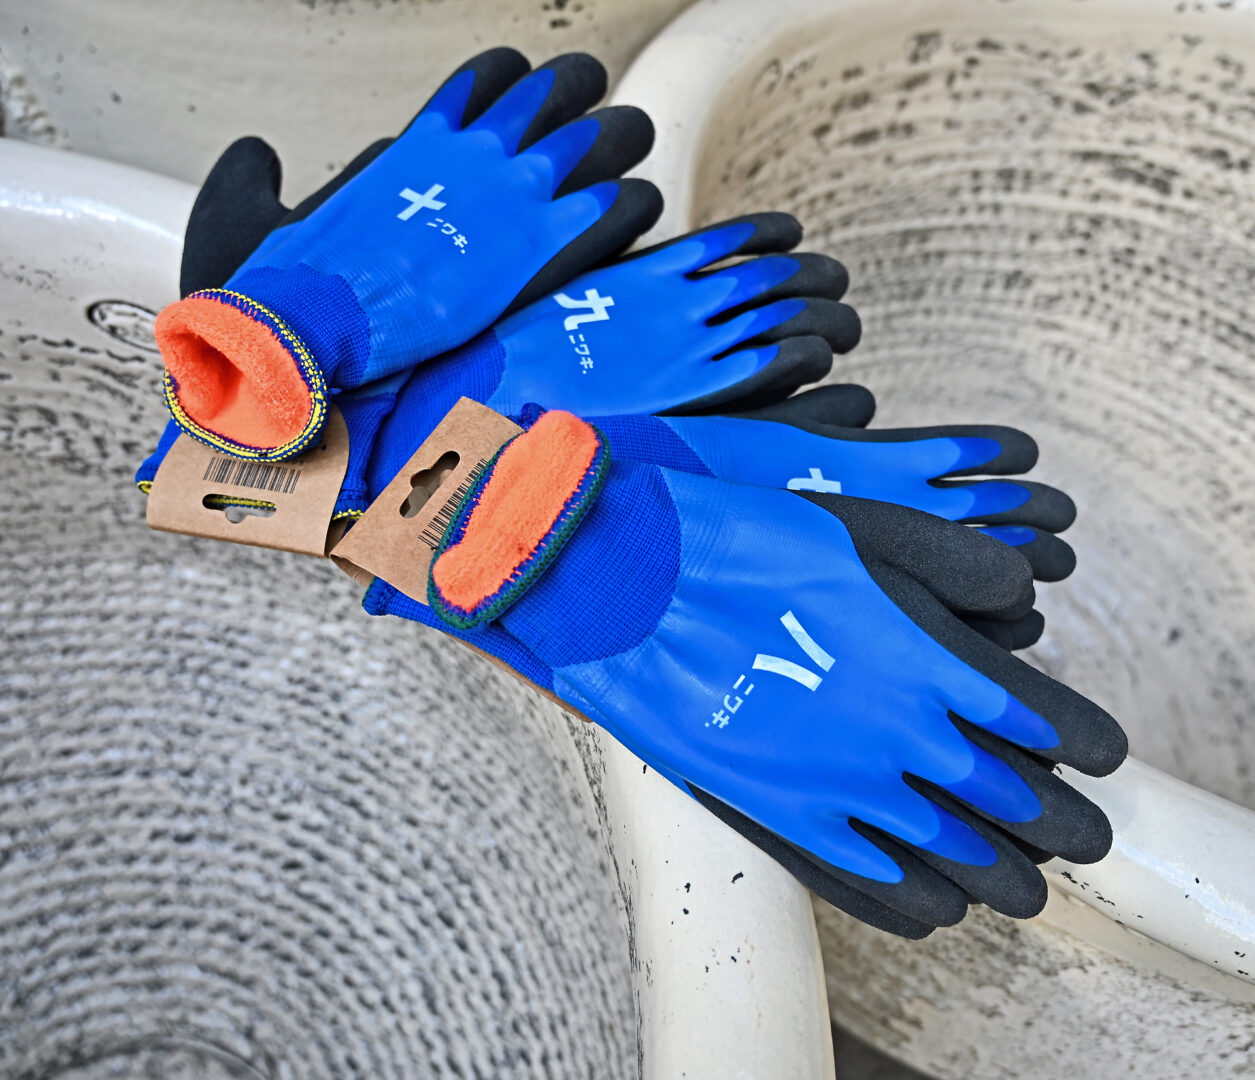 Gardening Gloves for Cold Weather